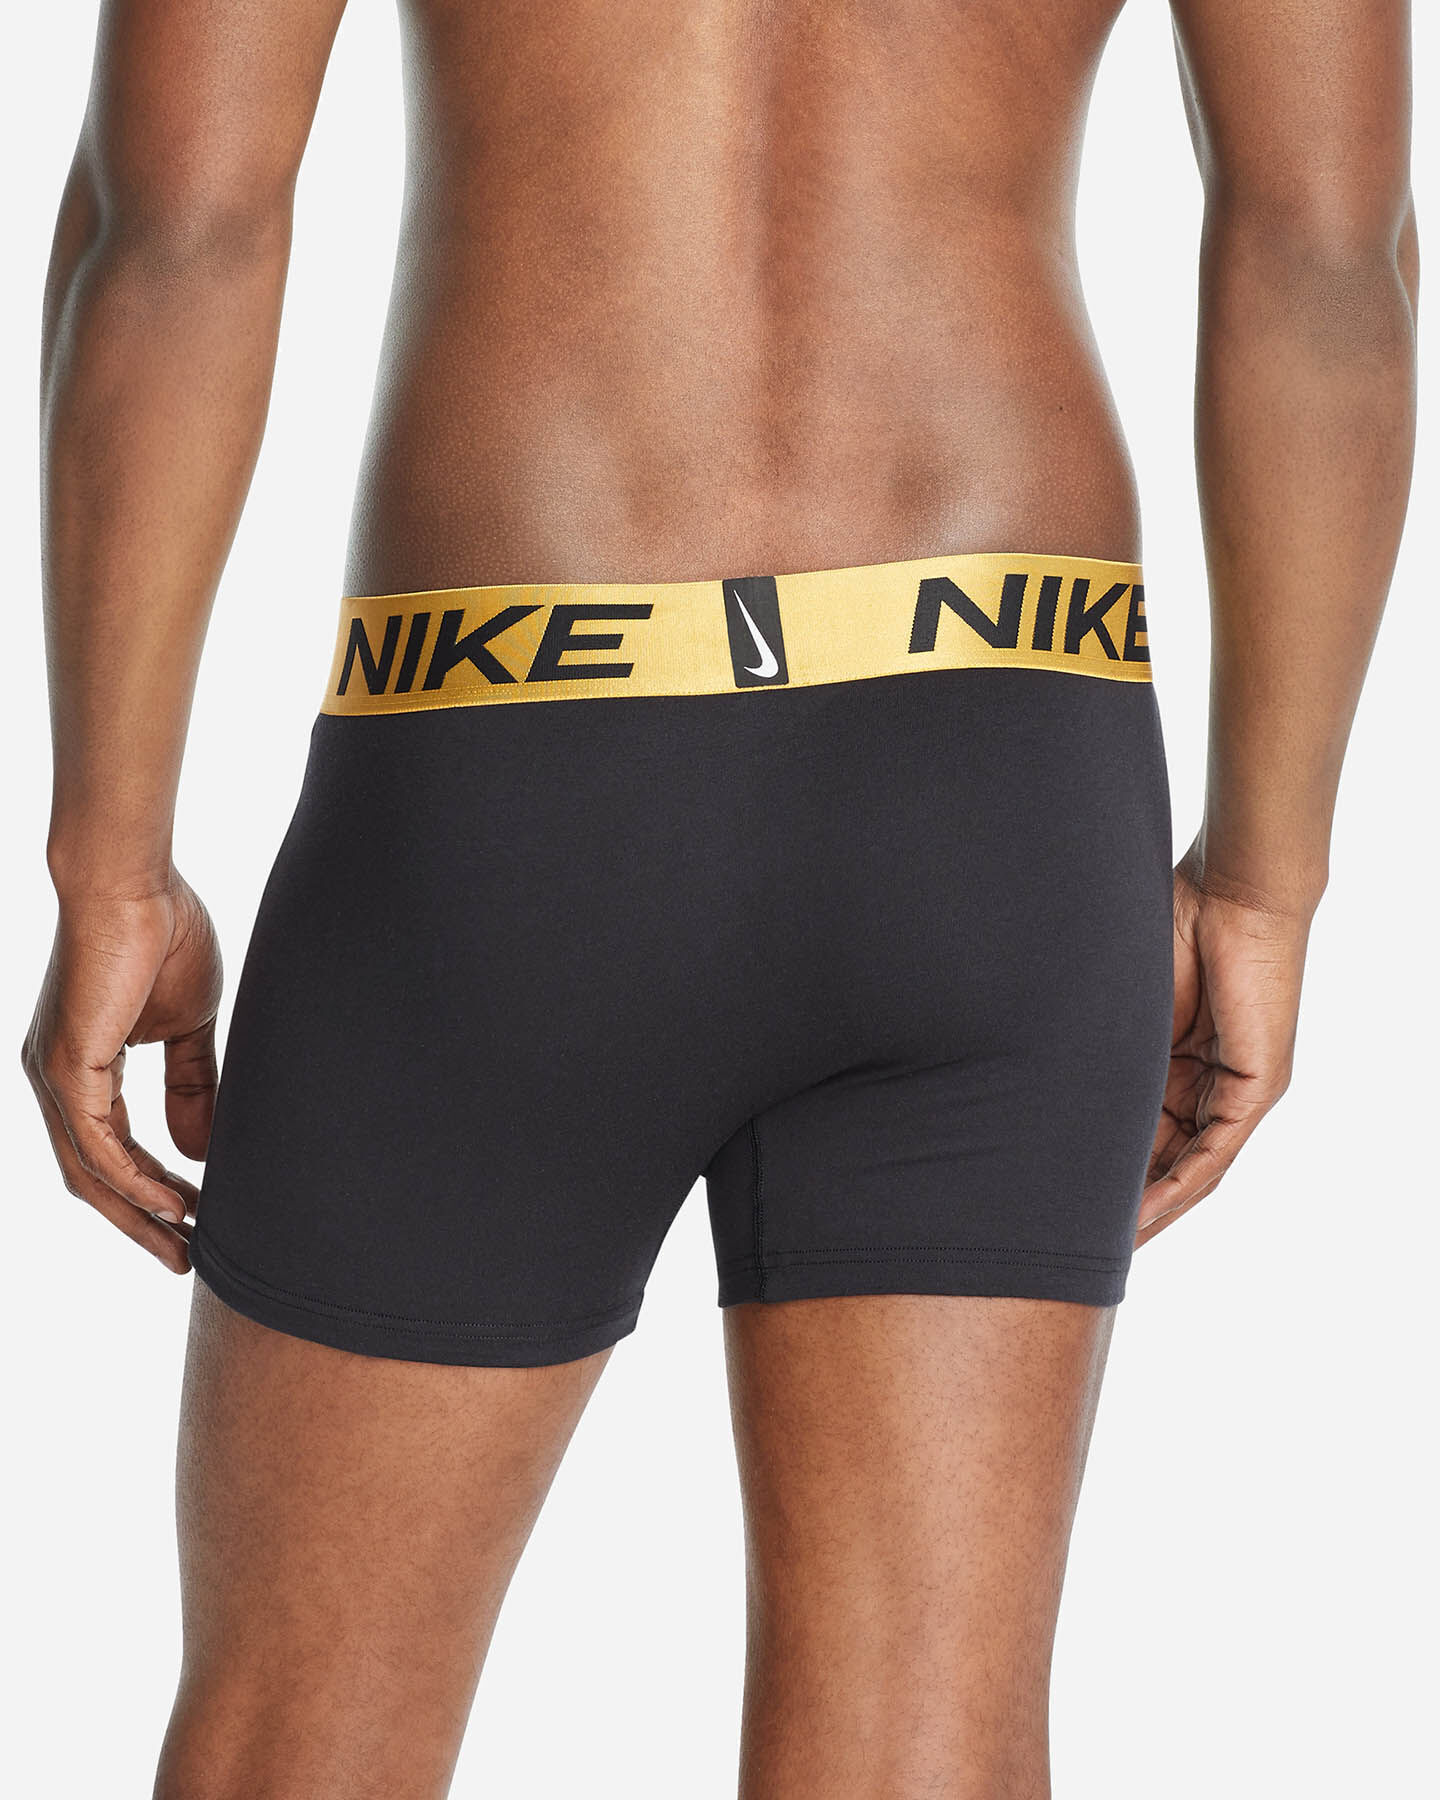  Intimo NIKE BOXER LUXE M S4099892|M1Q|S scatto 3